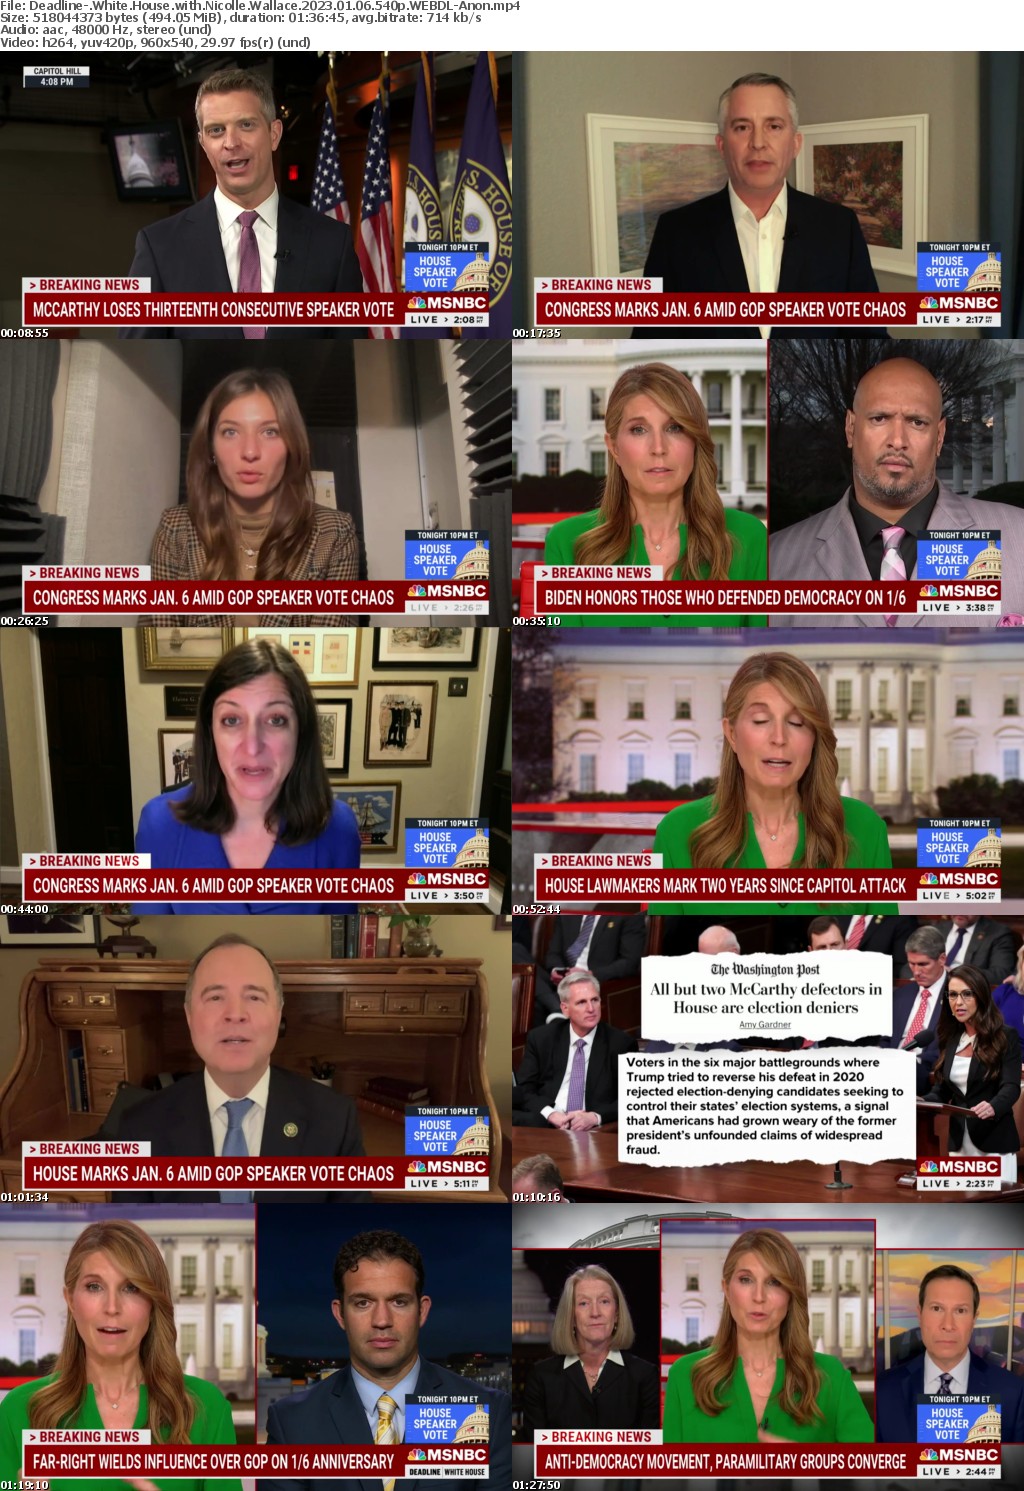 Deadline- White House with Nicolle Wallace 2023 01 06 540p WEBDL-Anon